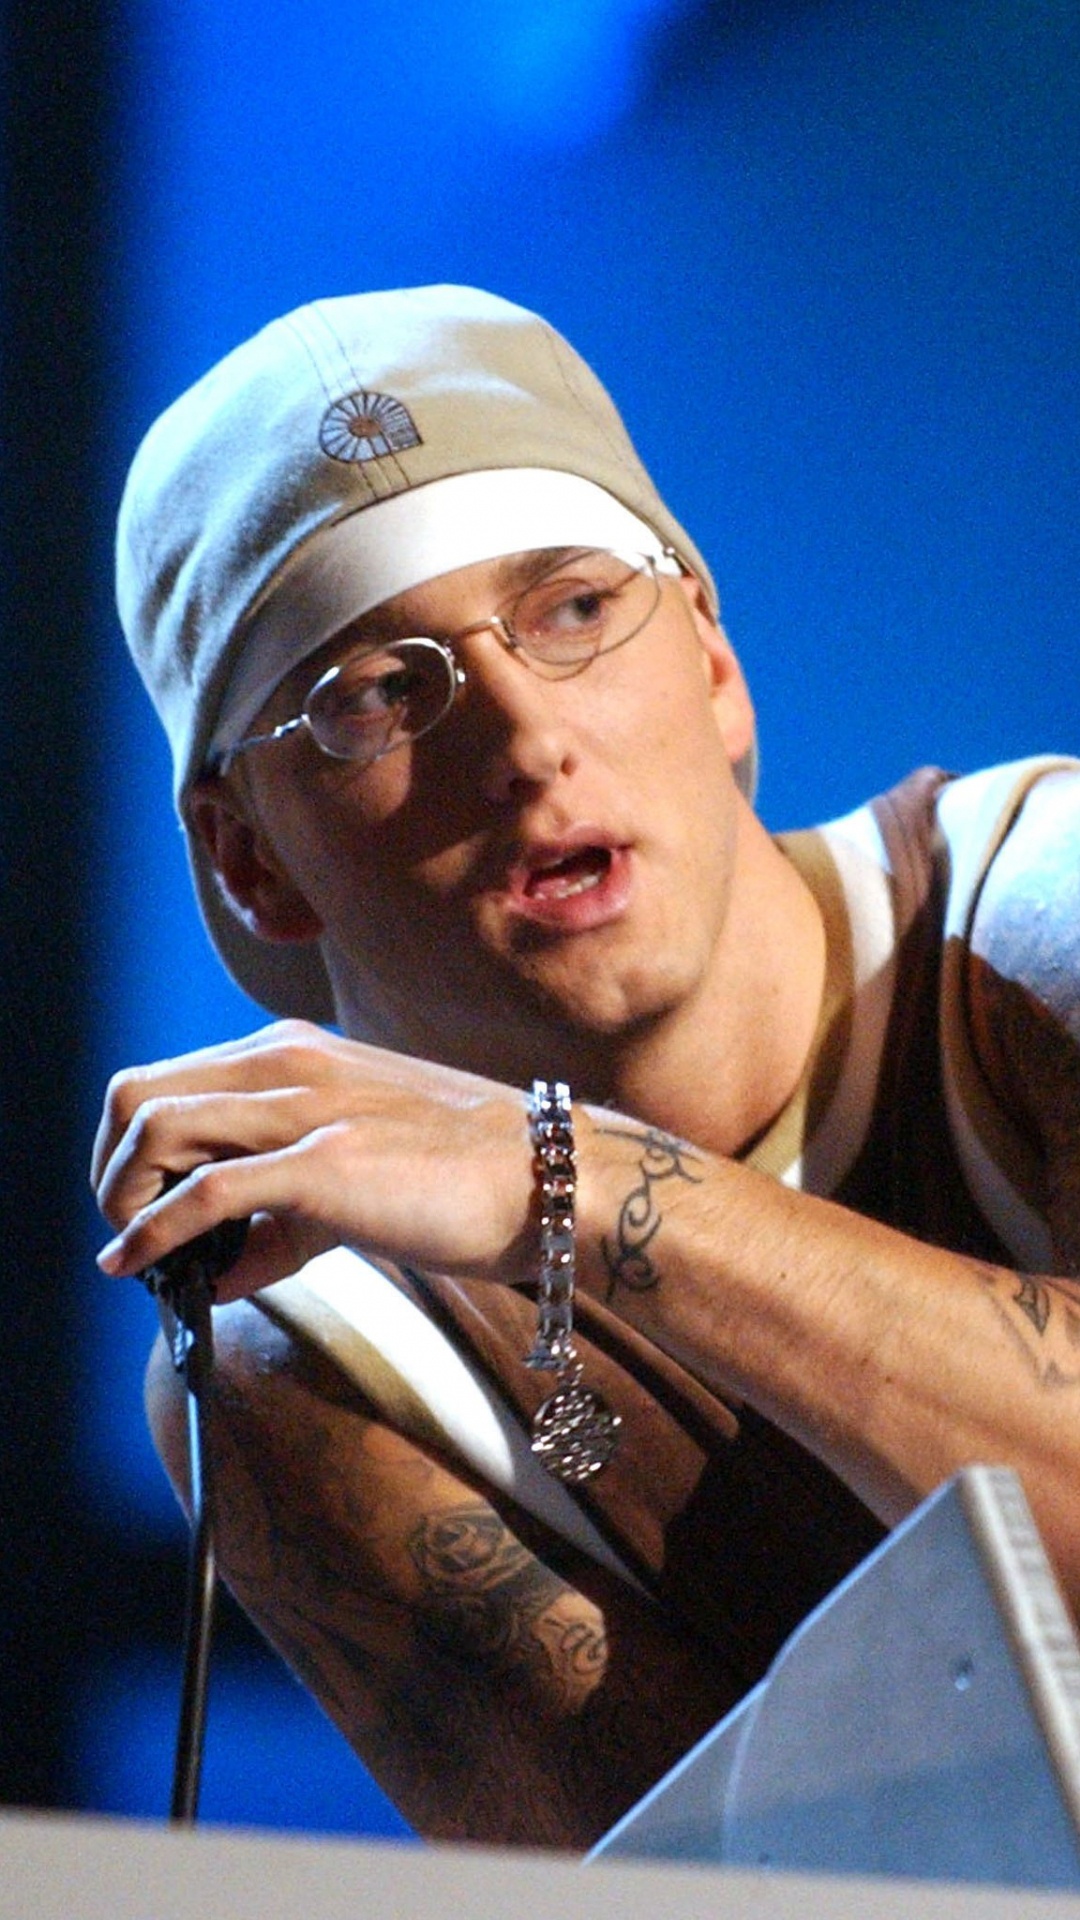 Eminem, Arm, Performance, Music, Muscle. Wallpaper in 1080x1920 Resolution